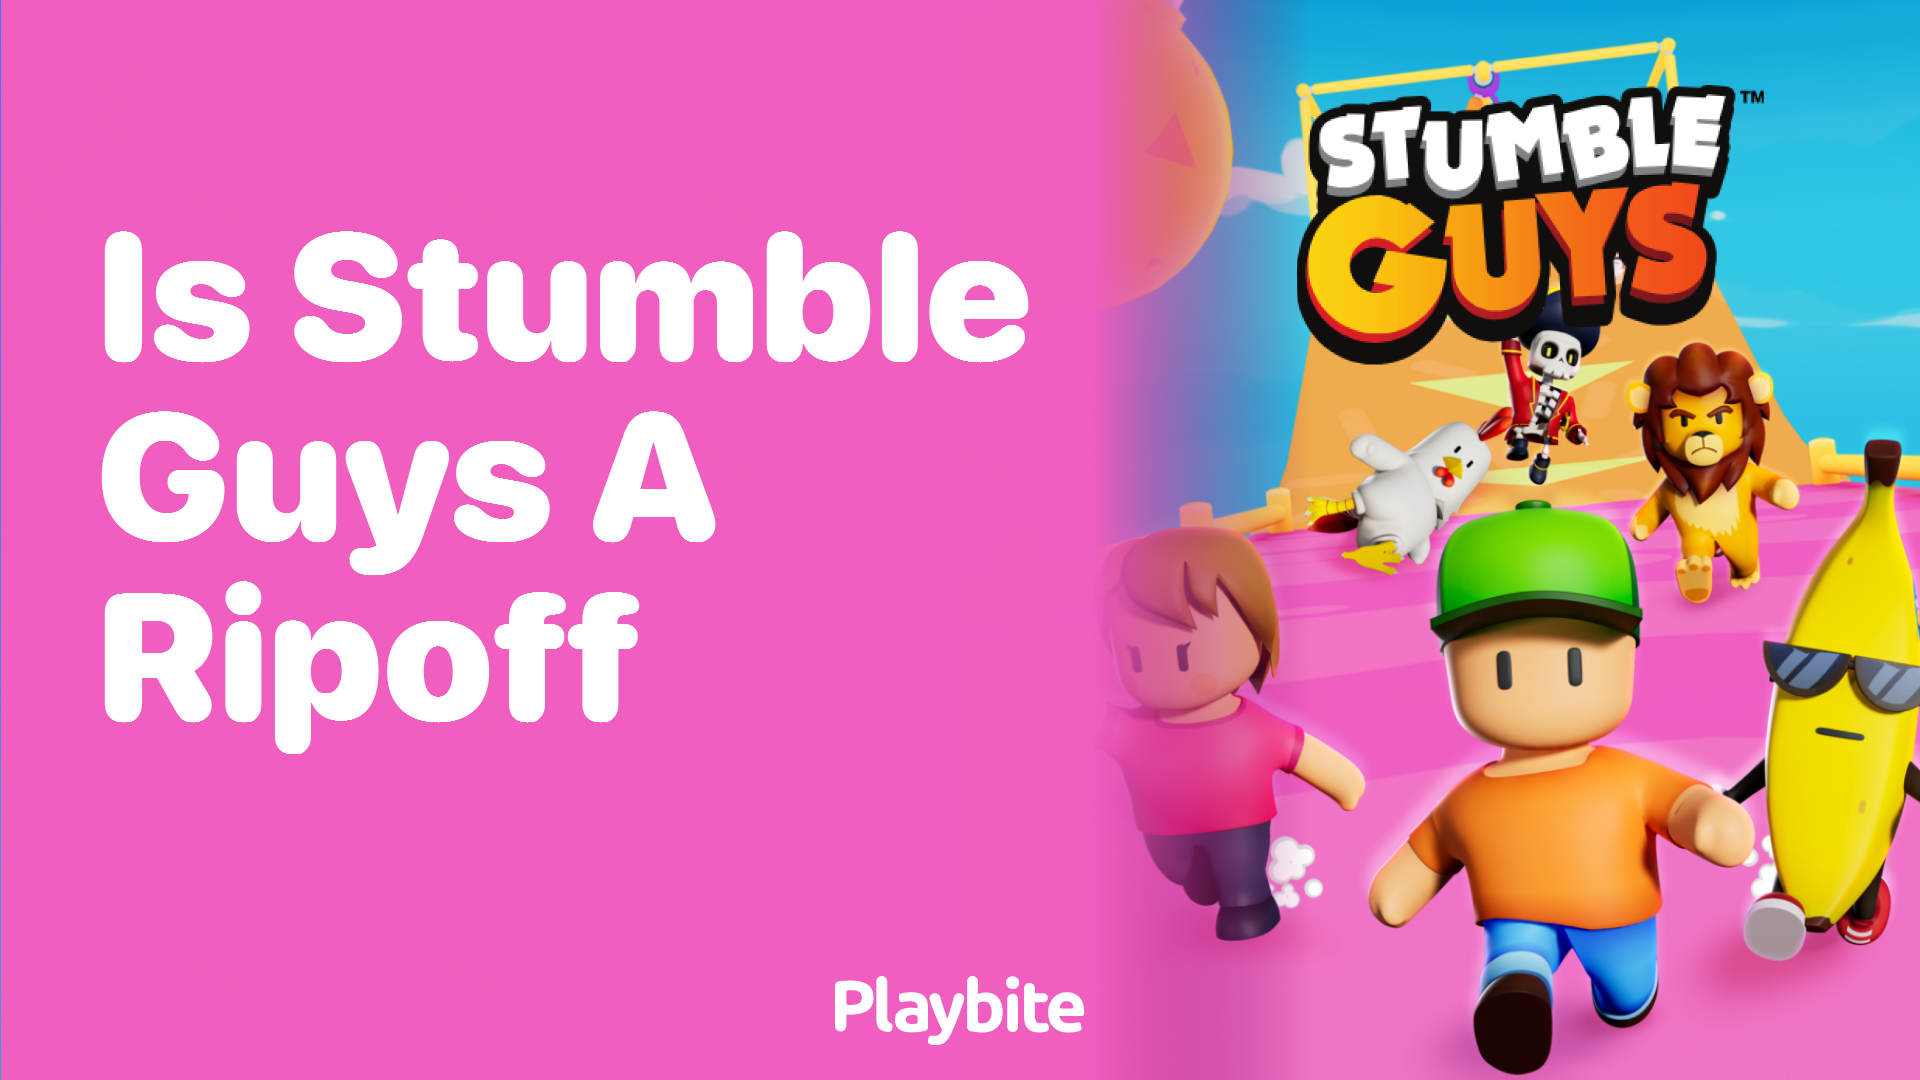 Is Stumble Guys a Ripoff? Unpacking the Truth